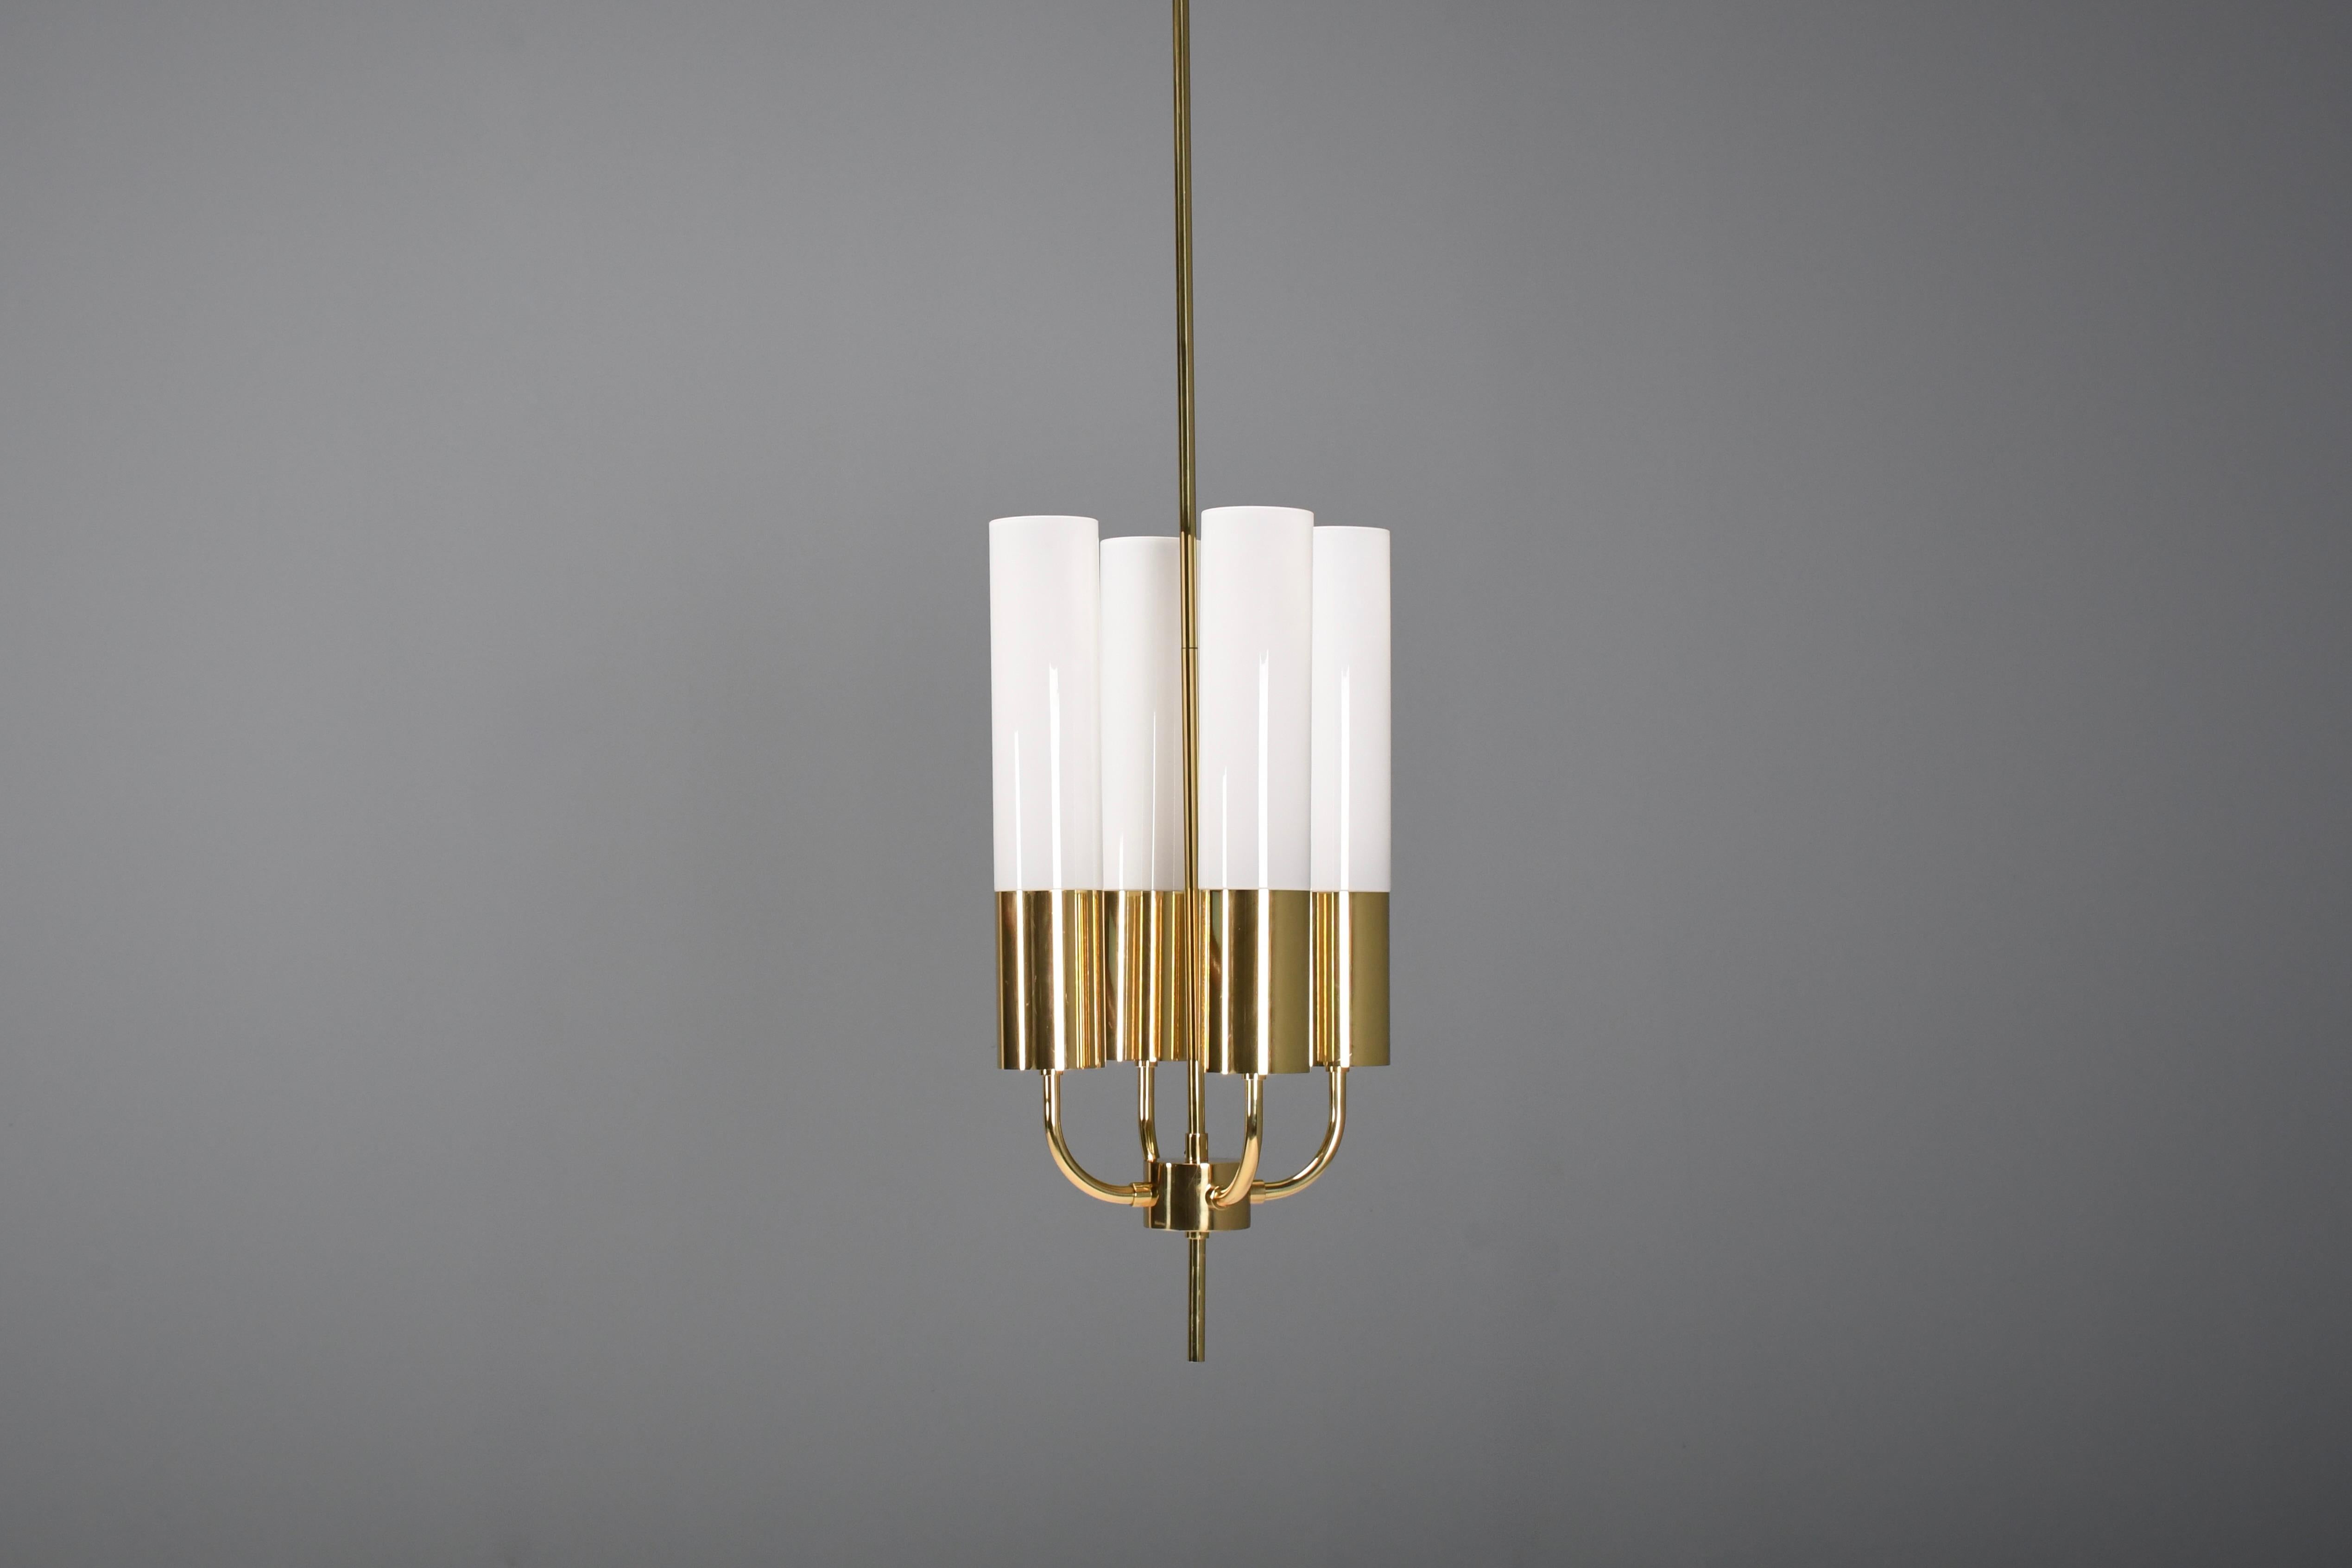 Beautiful large 1970s Chandelier in very good condition.

We have two of these chandeliers available.

The chandelier is produced by Glashütte Limburg in the 1970s.

It is made from solid polished brass and has four arms with four opaline glass